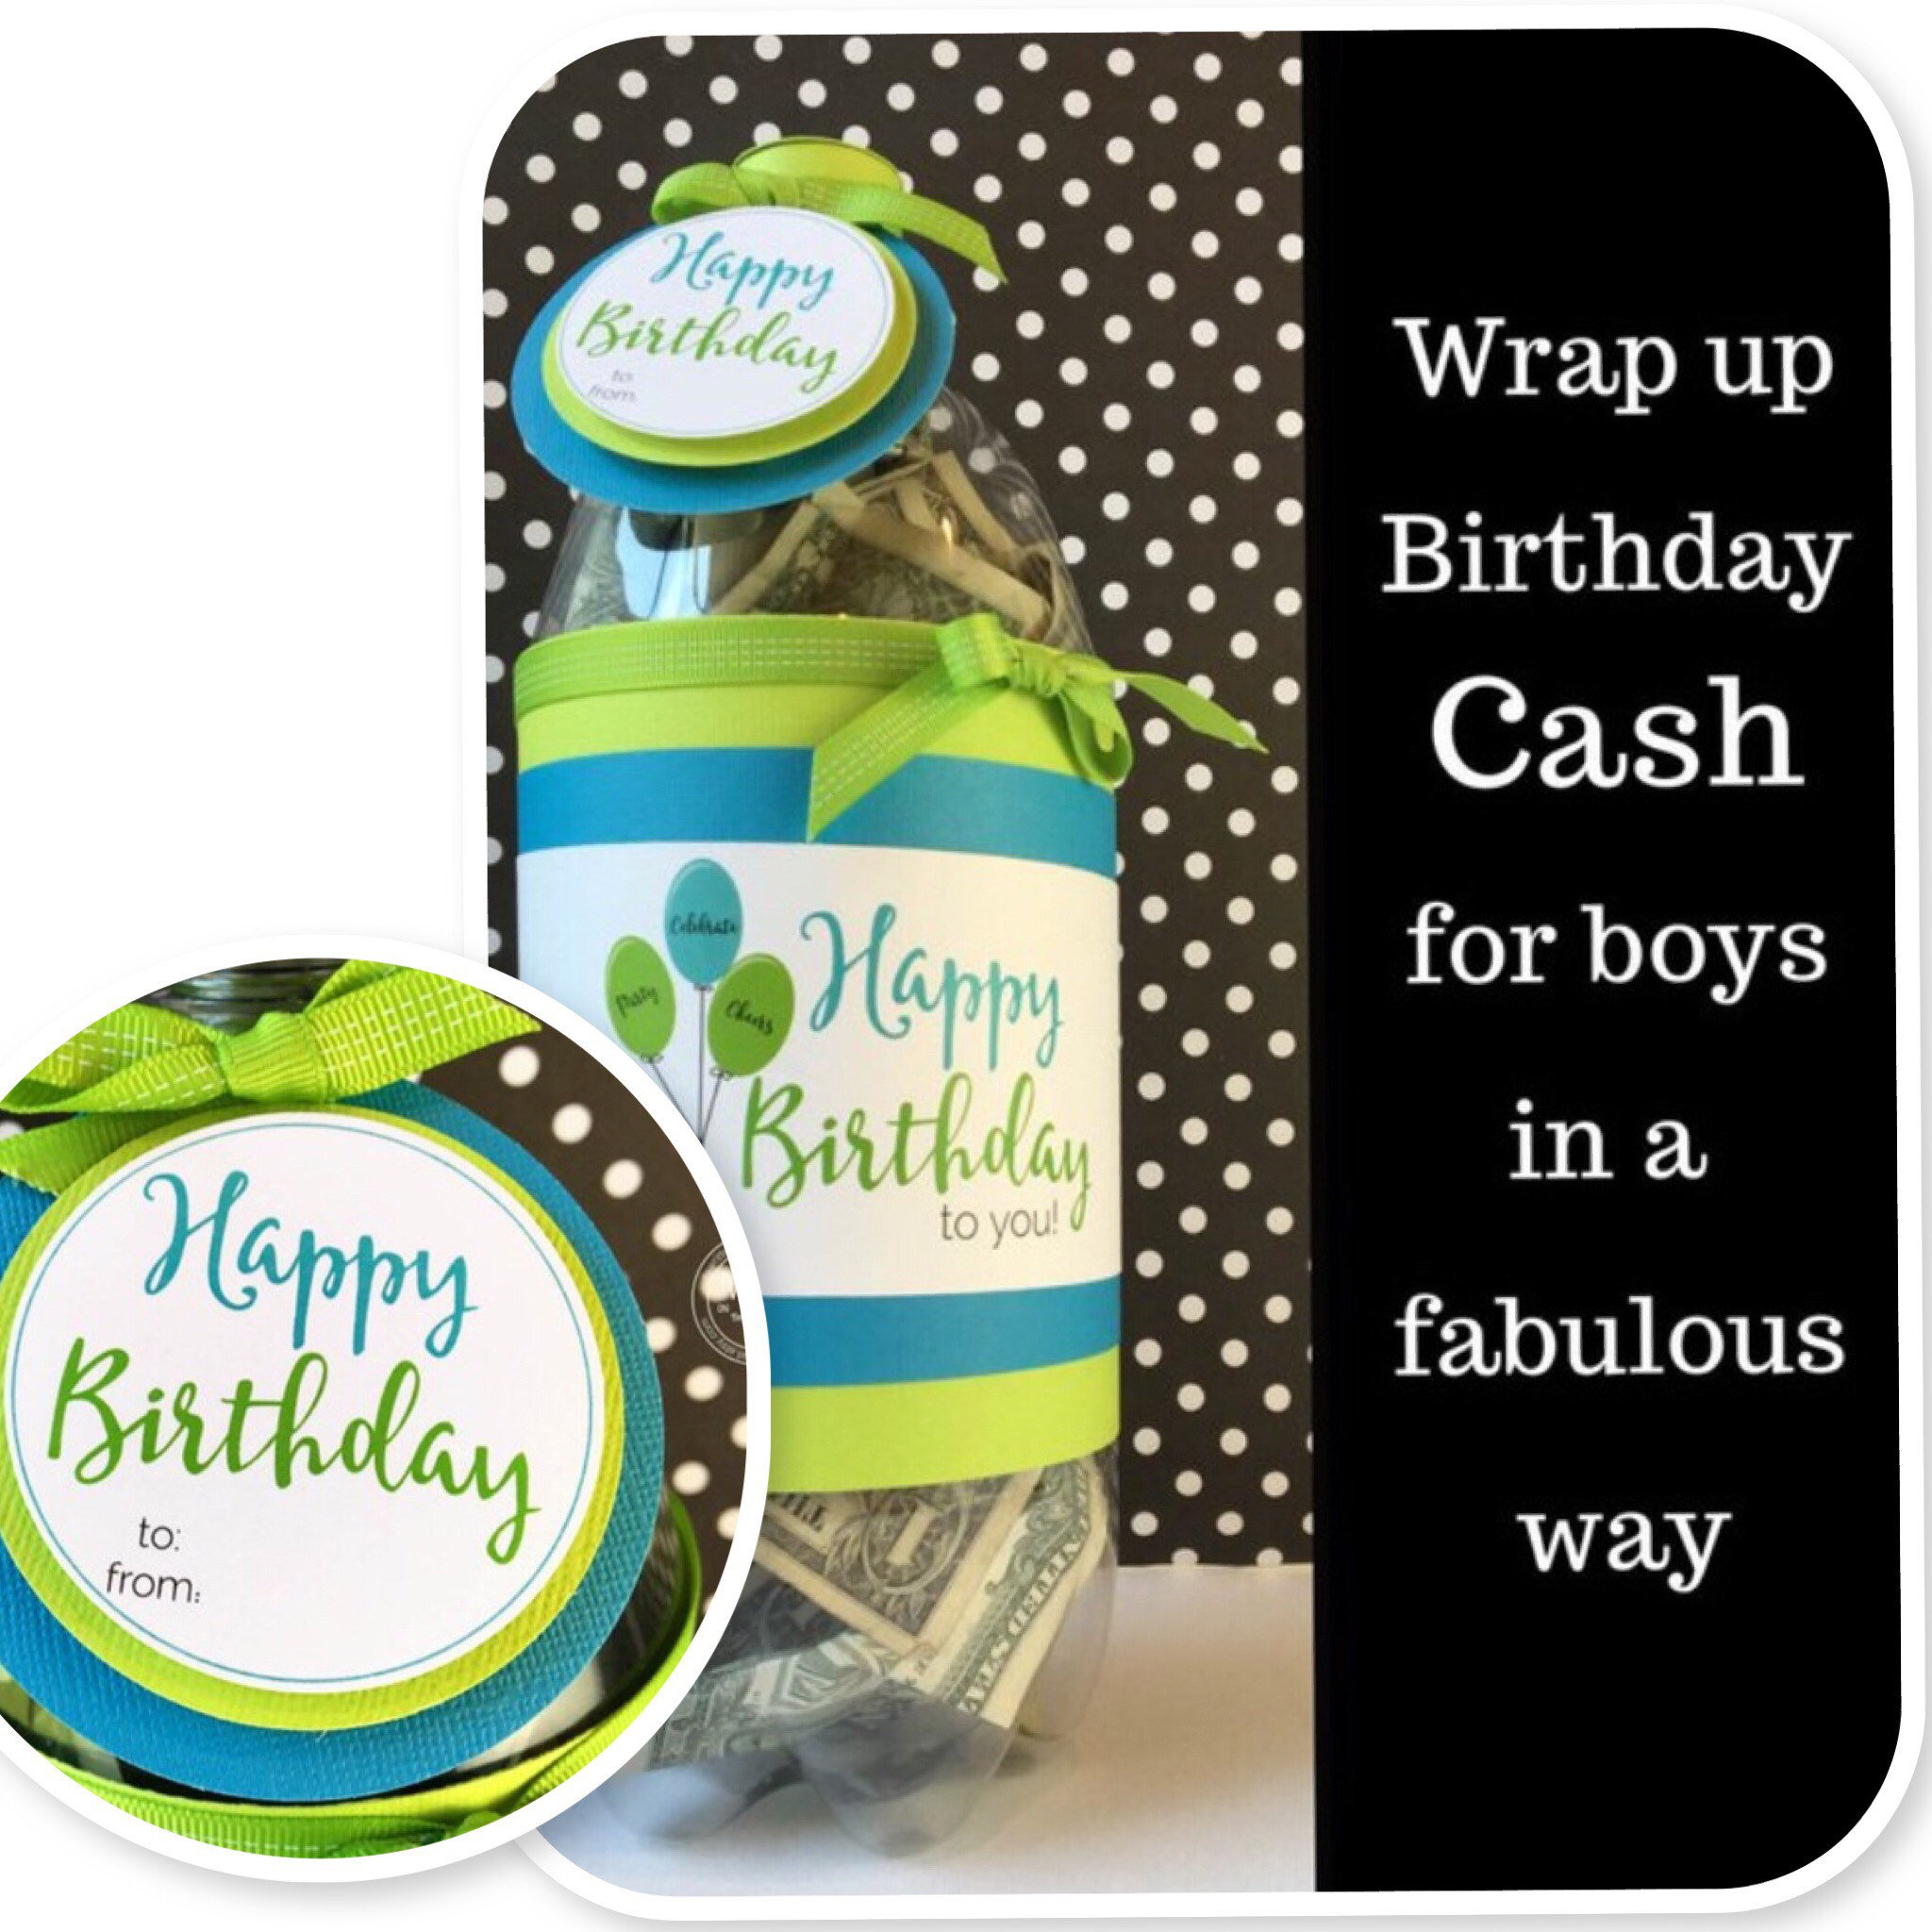 Ideas For Happy Birthday Cards Birthday Cash Gift Idea Happy Birthday Soda Bottle Label And Gift Tags Bottle Cookies Candy Money Birthday Cards